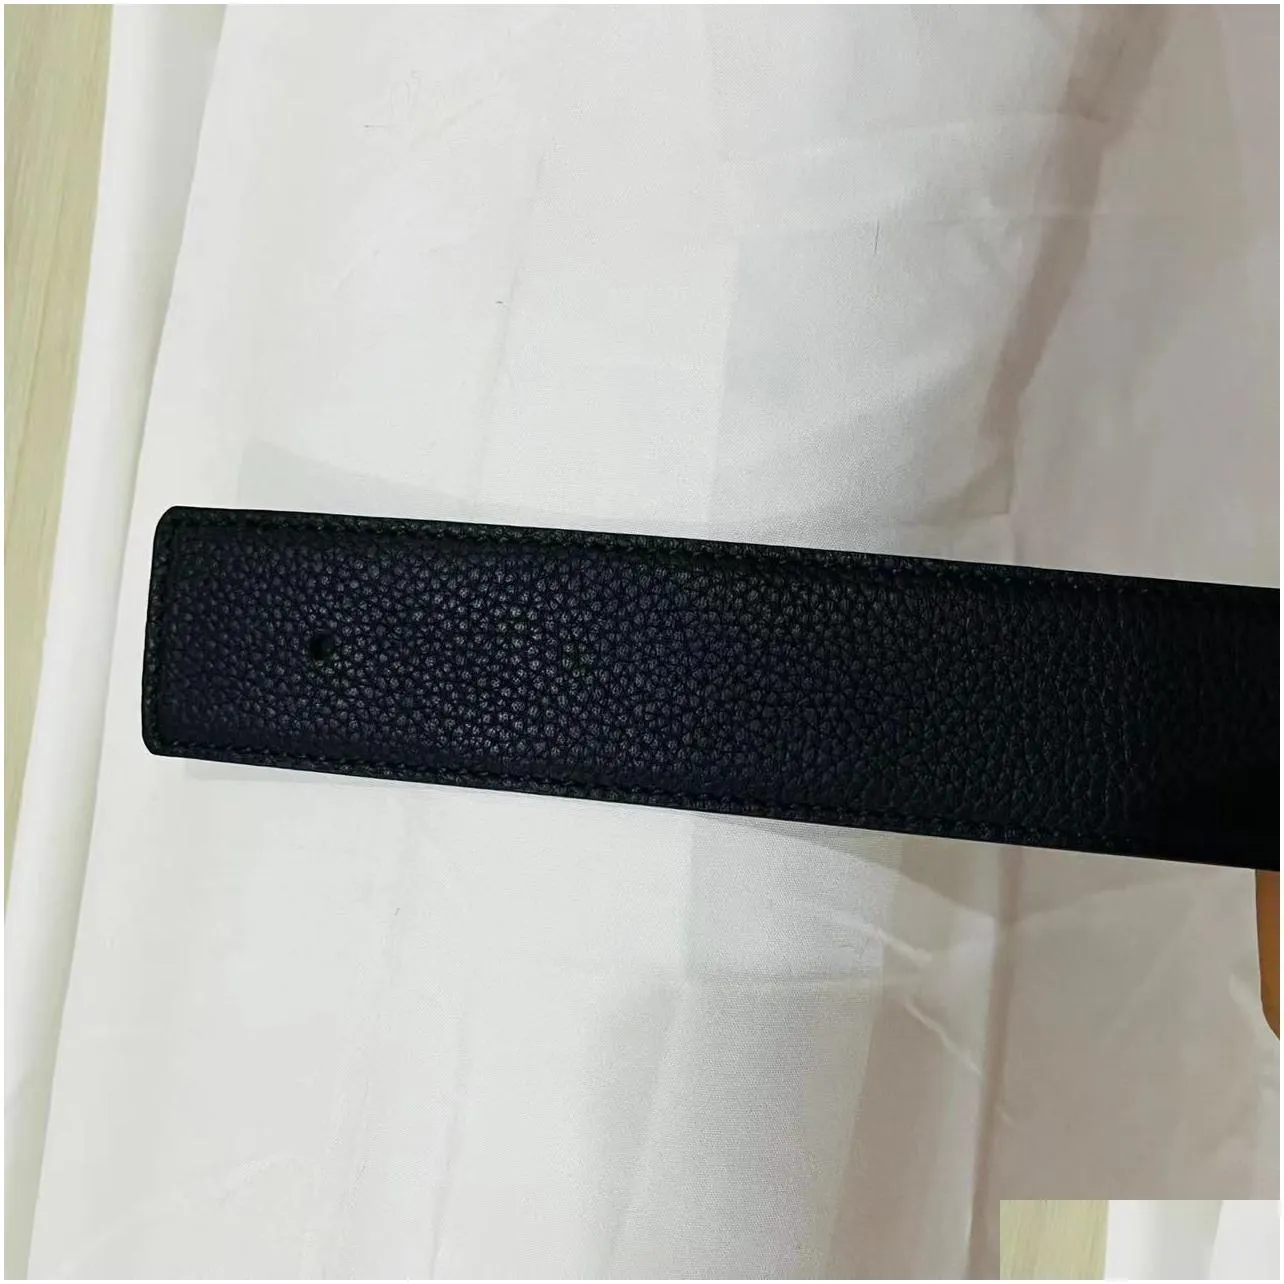 luxury designer belts men women belt with fashion big buckle real leather top high quality 3.8 3.4 2.4 cm